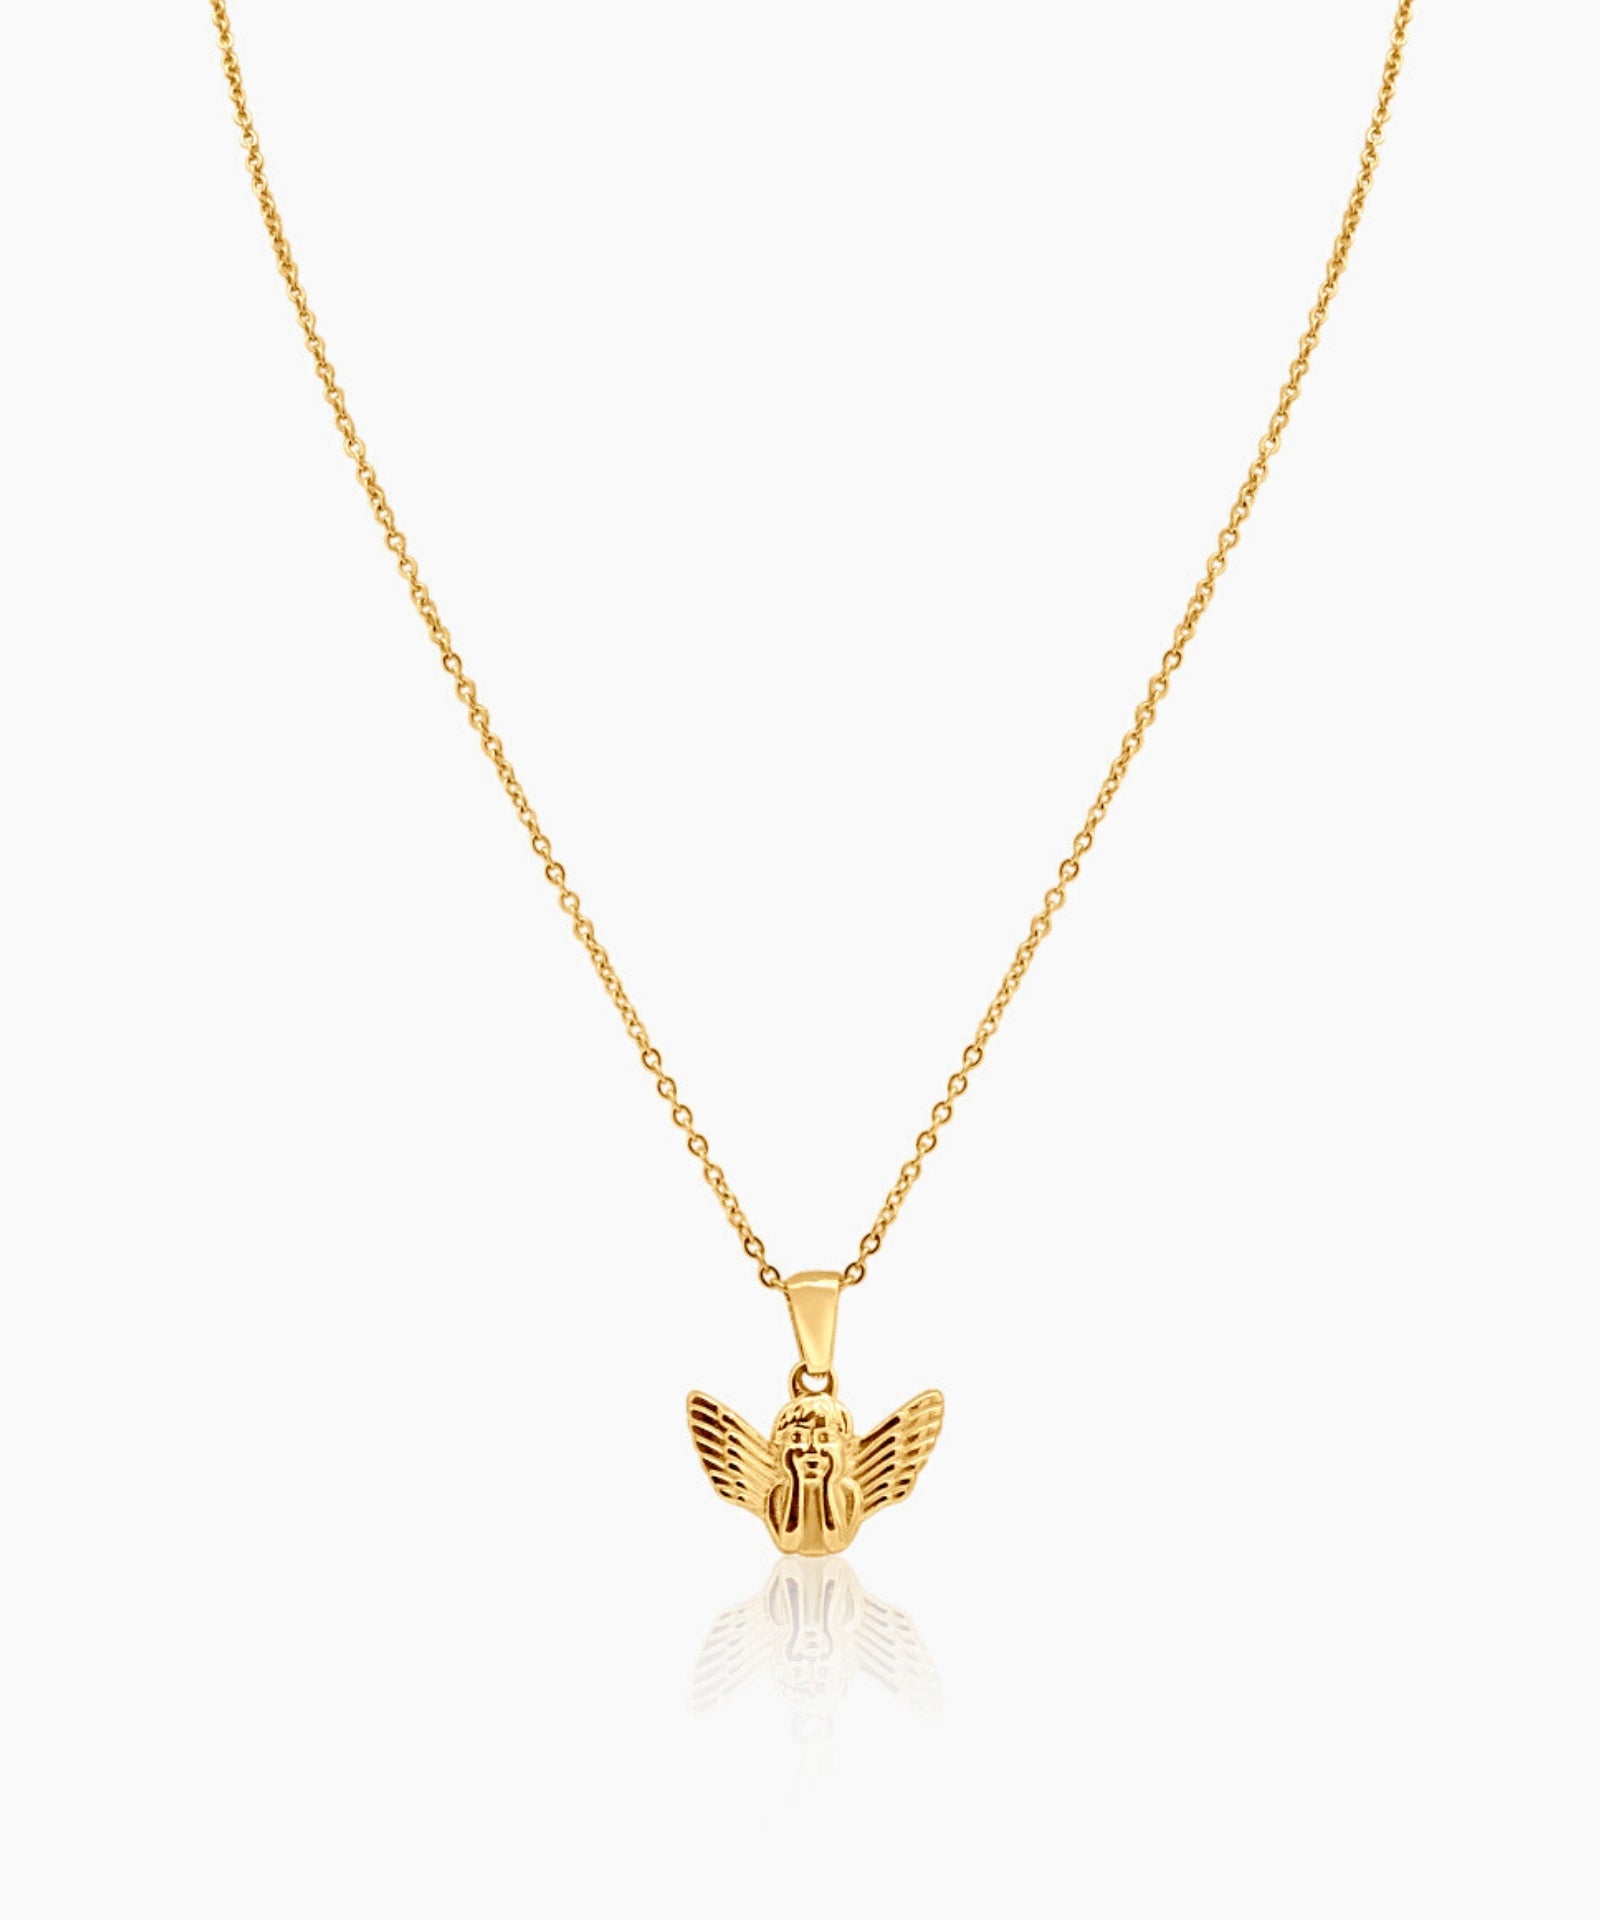 Angel Pendant Necklace - 14K Gold Plated Angel Necklace, Guardian - Women,  Girl